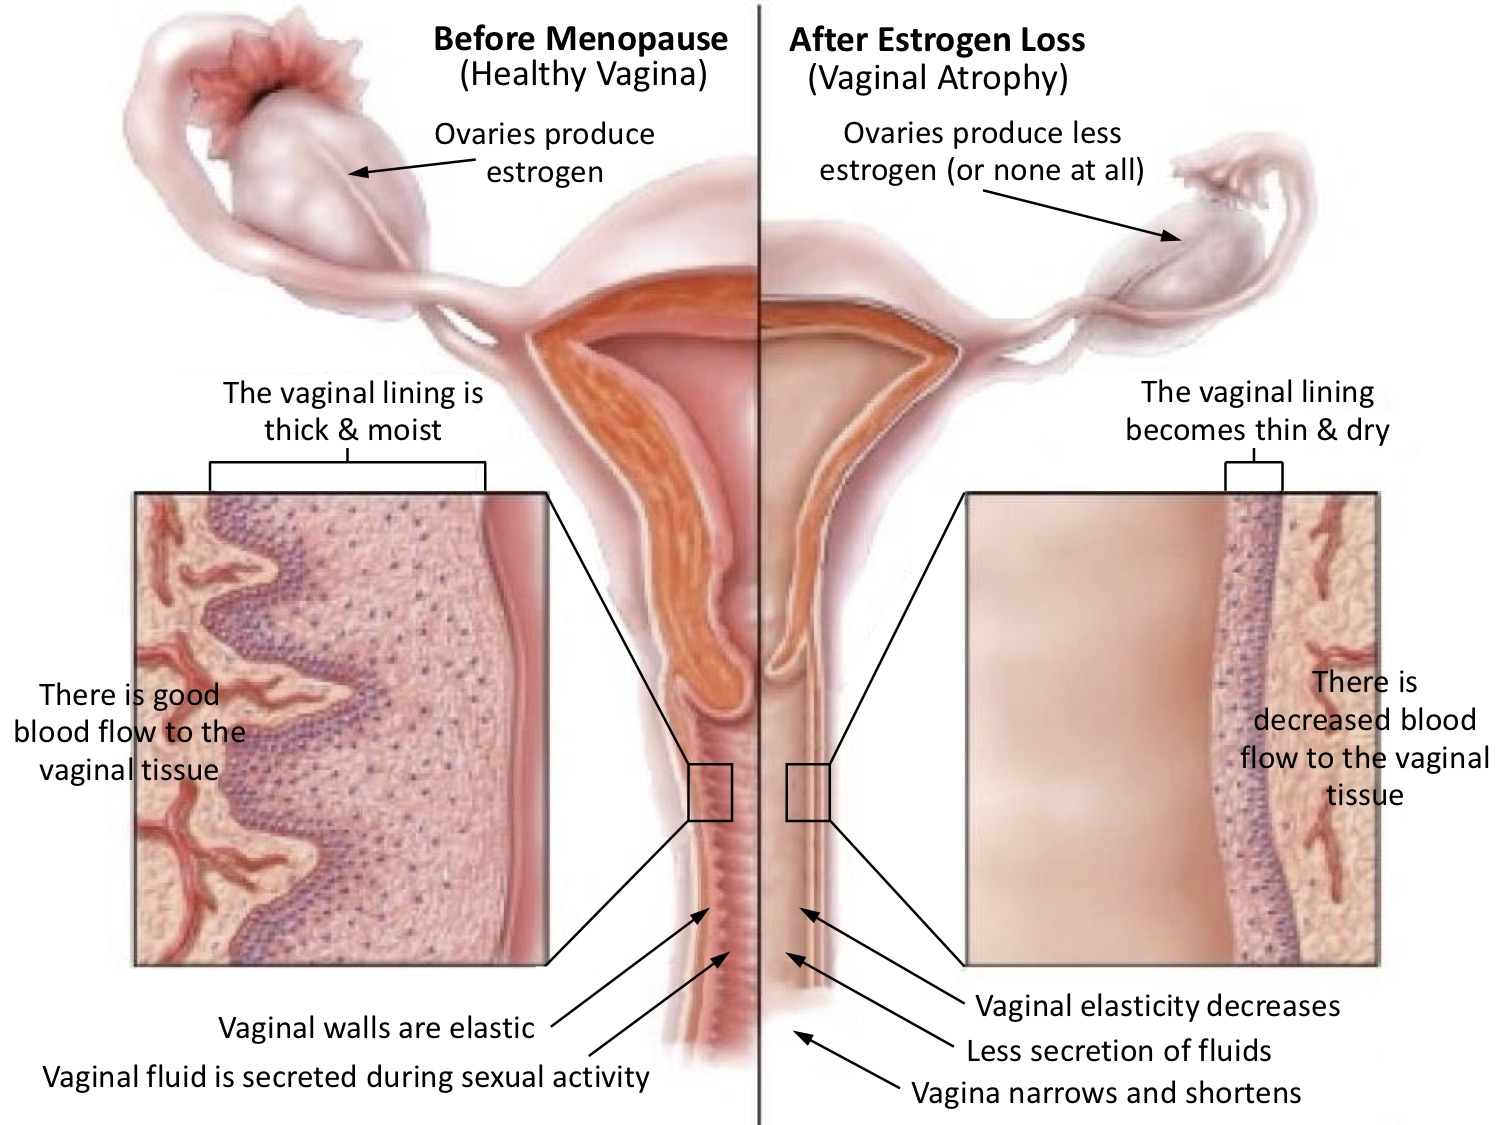 Diagram of before and after menopause